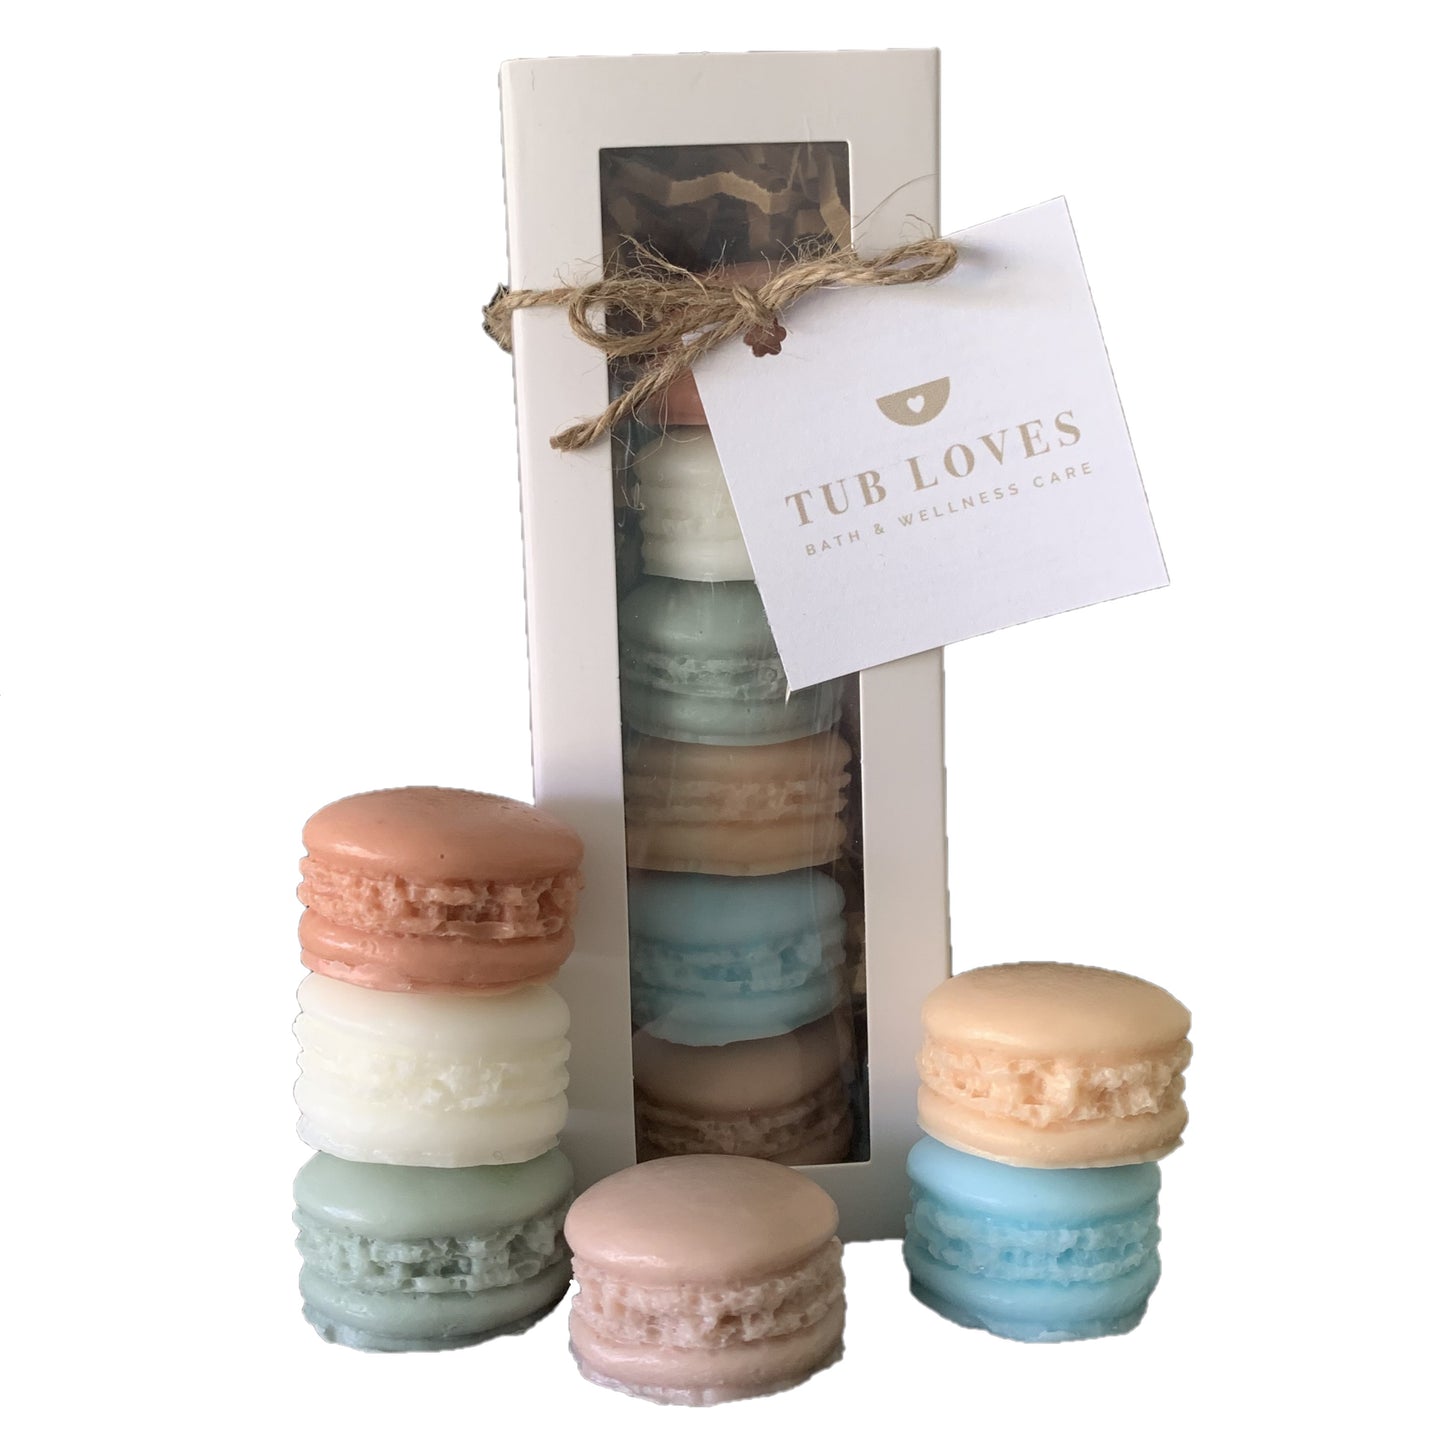 MACARON TRIPLE BUTTER GOATS MILK SOAP - HOLIDAY GIFT SET - Tub Loves